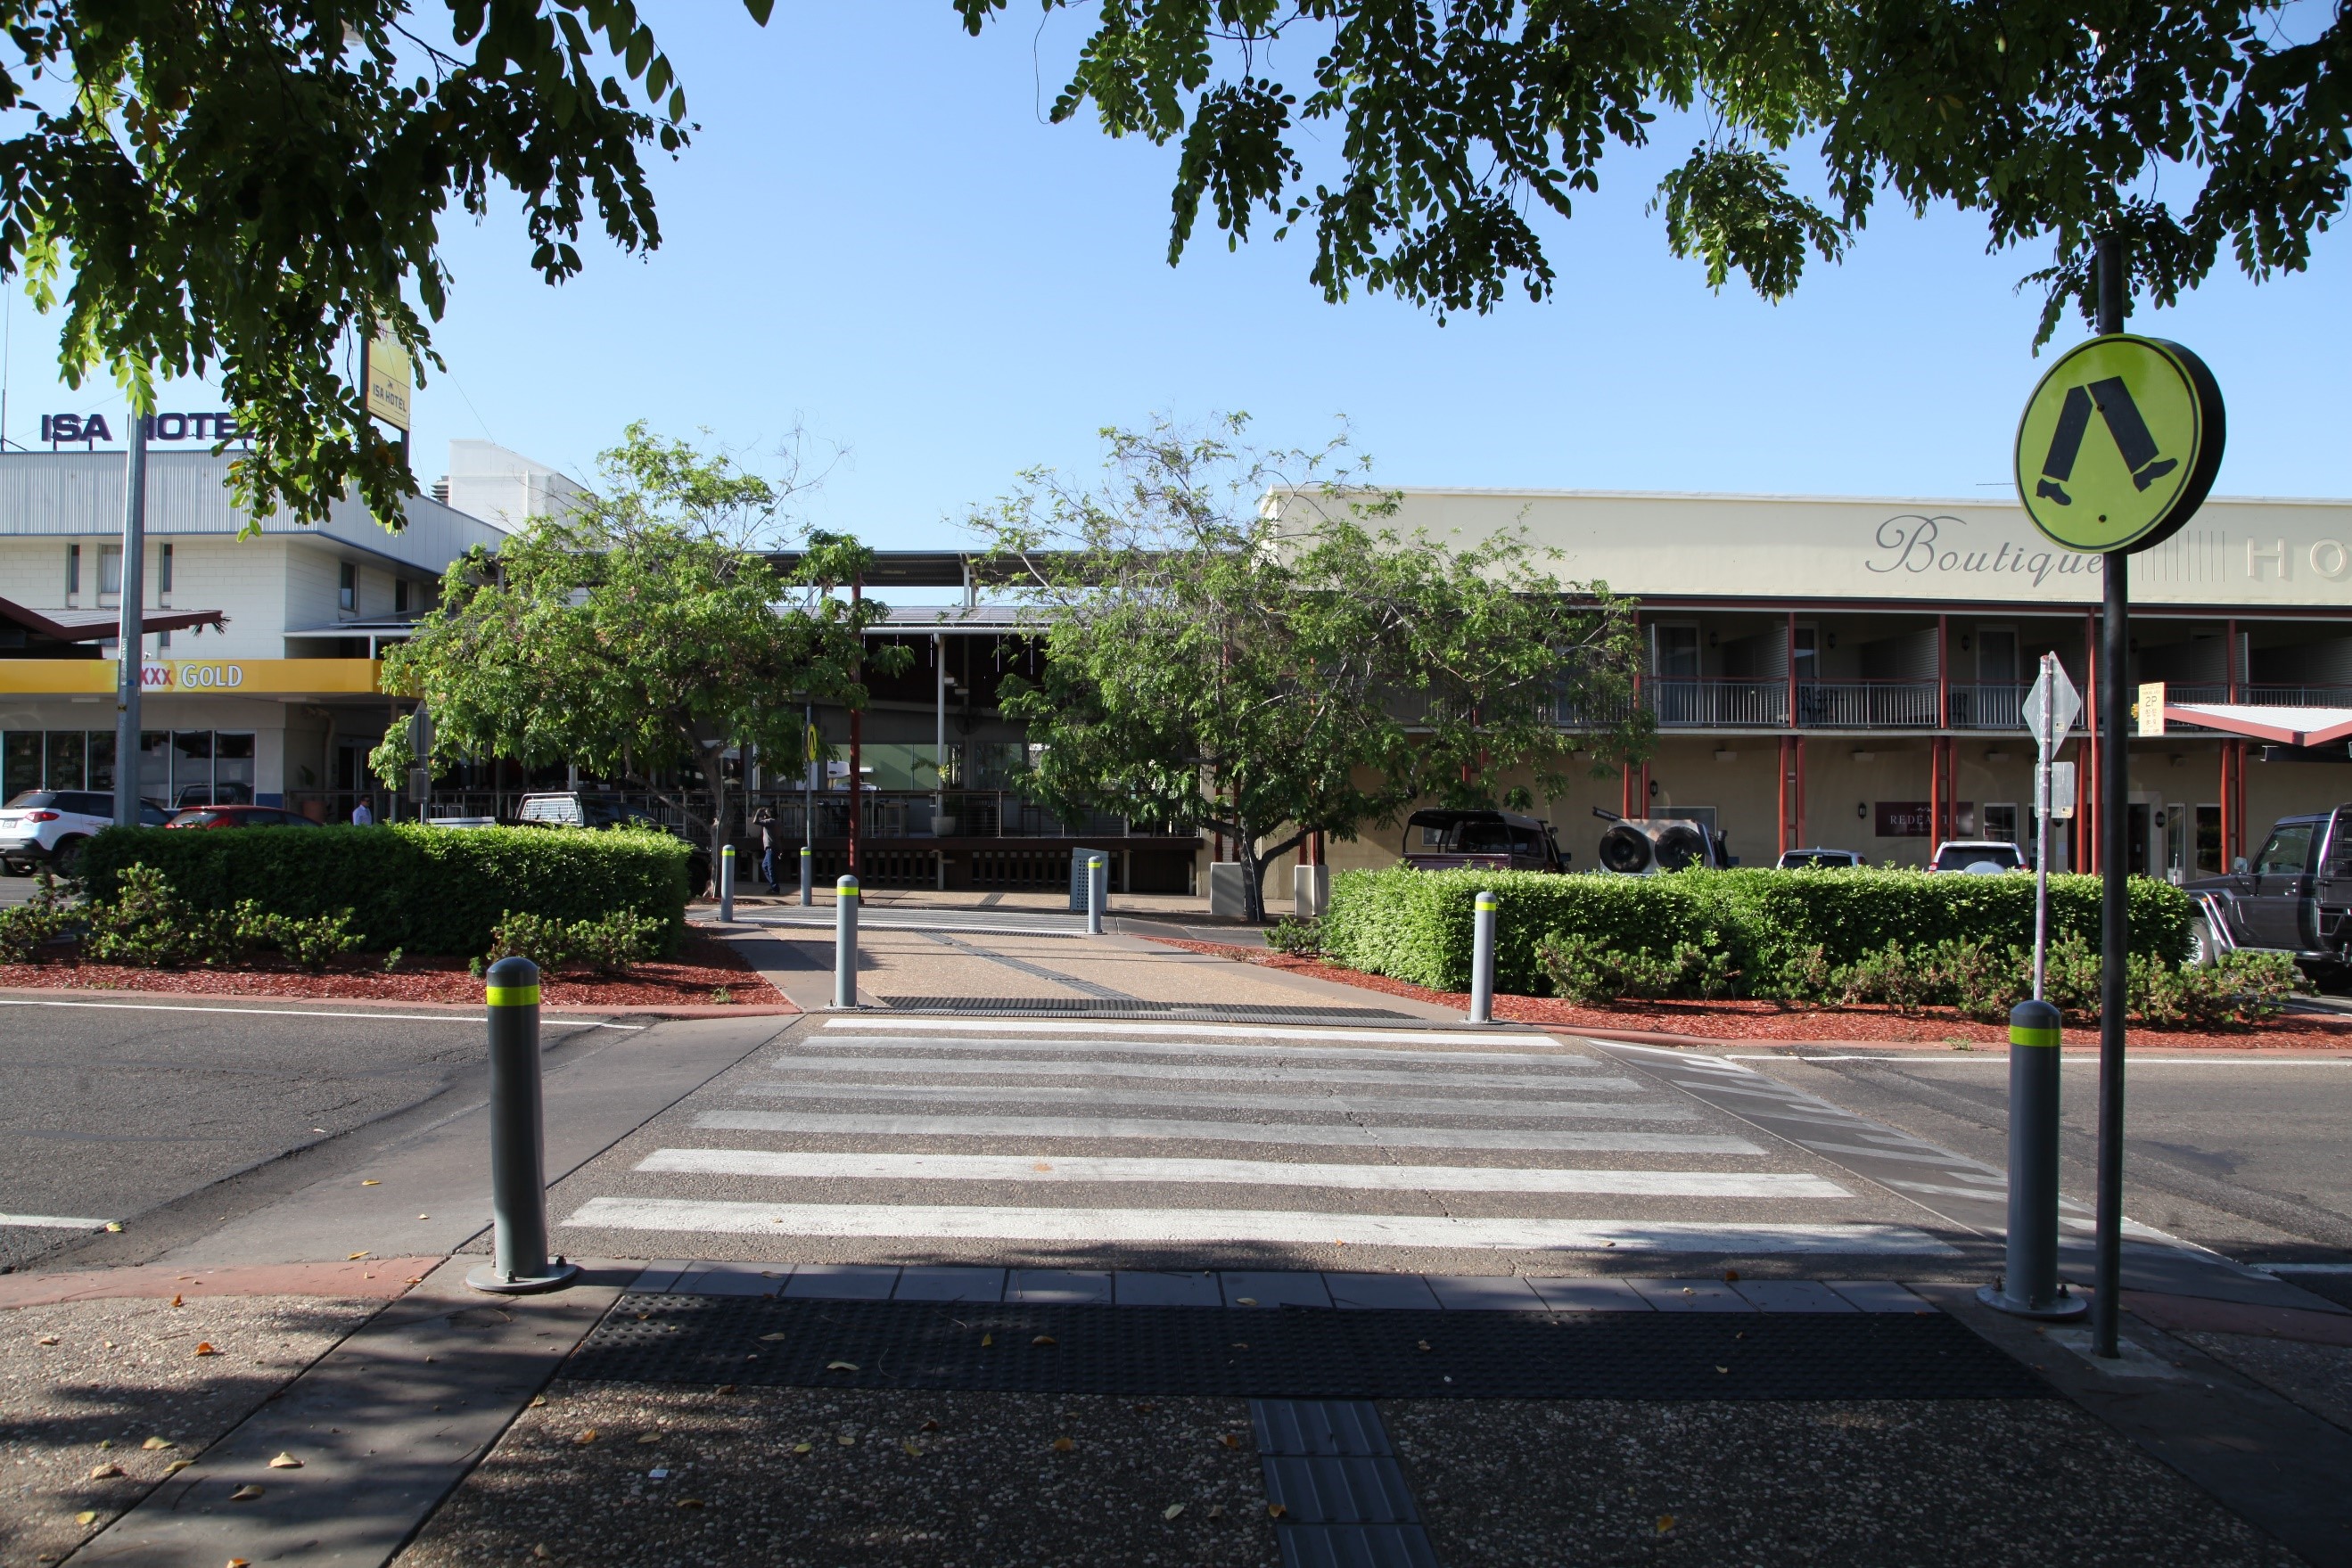 Mount Isa City Council building with pedestrian crossing over road in front of the building